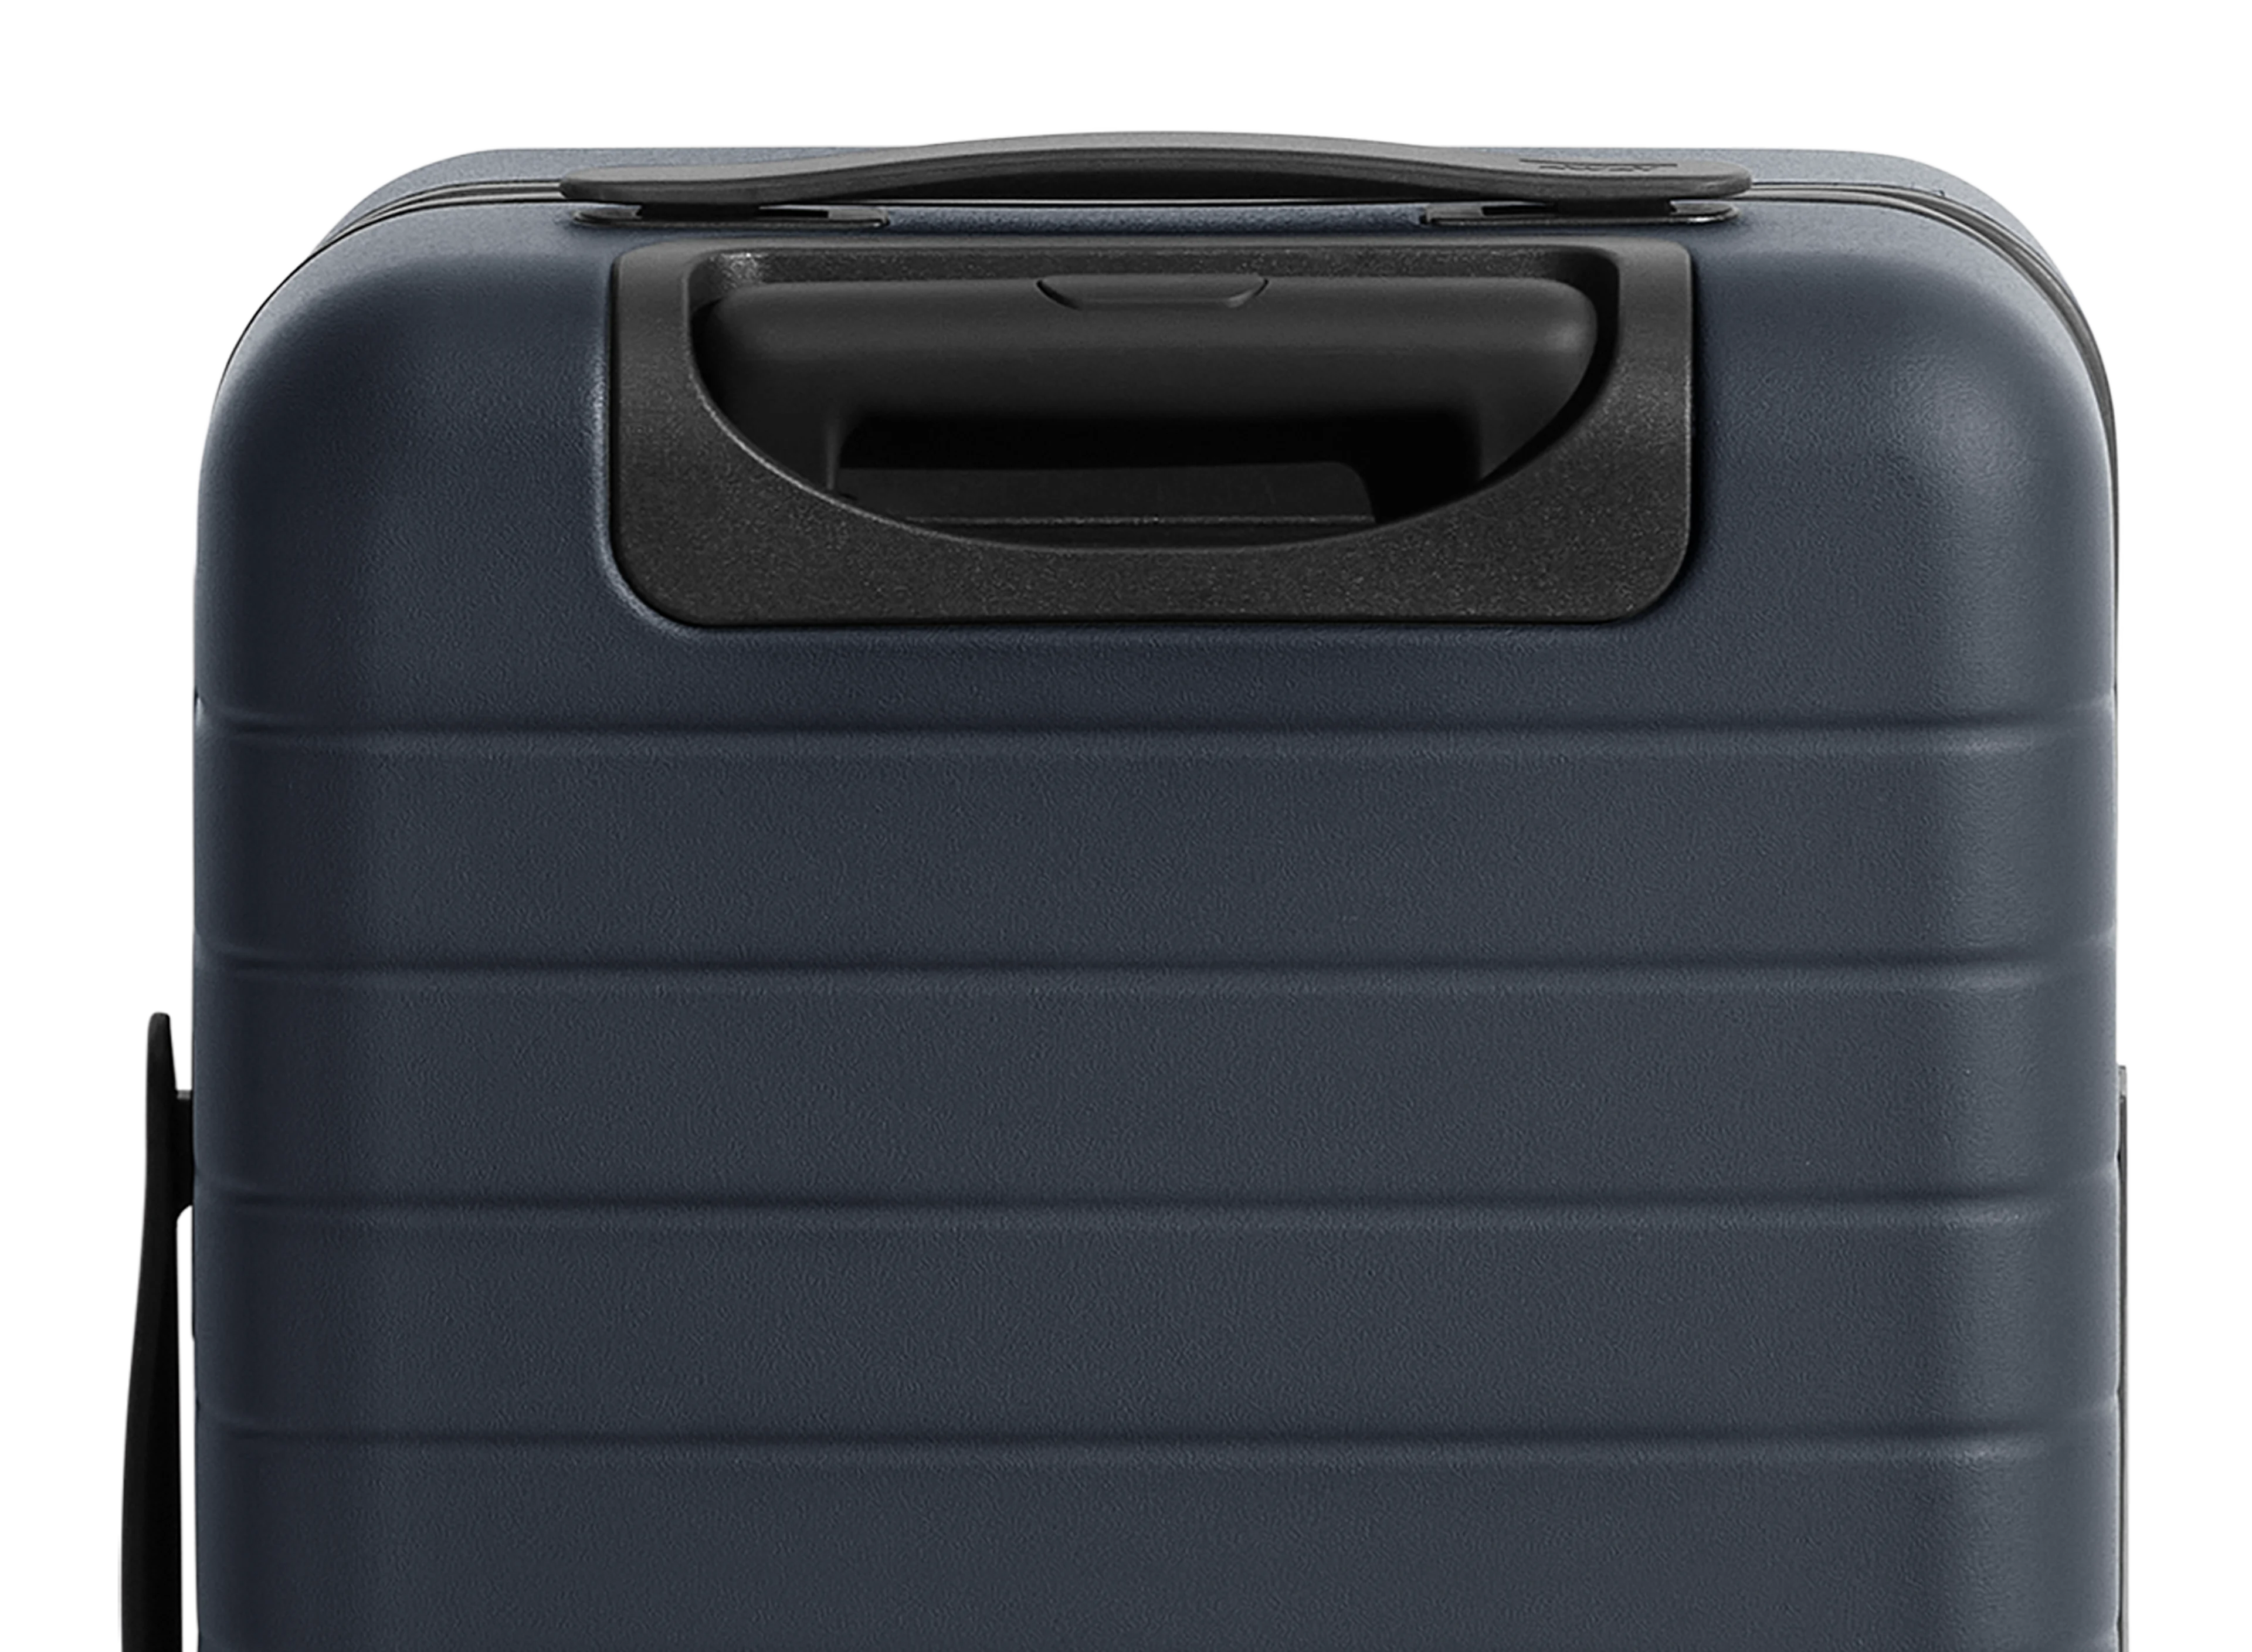 The Carry-On in Navy Blue